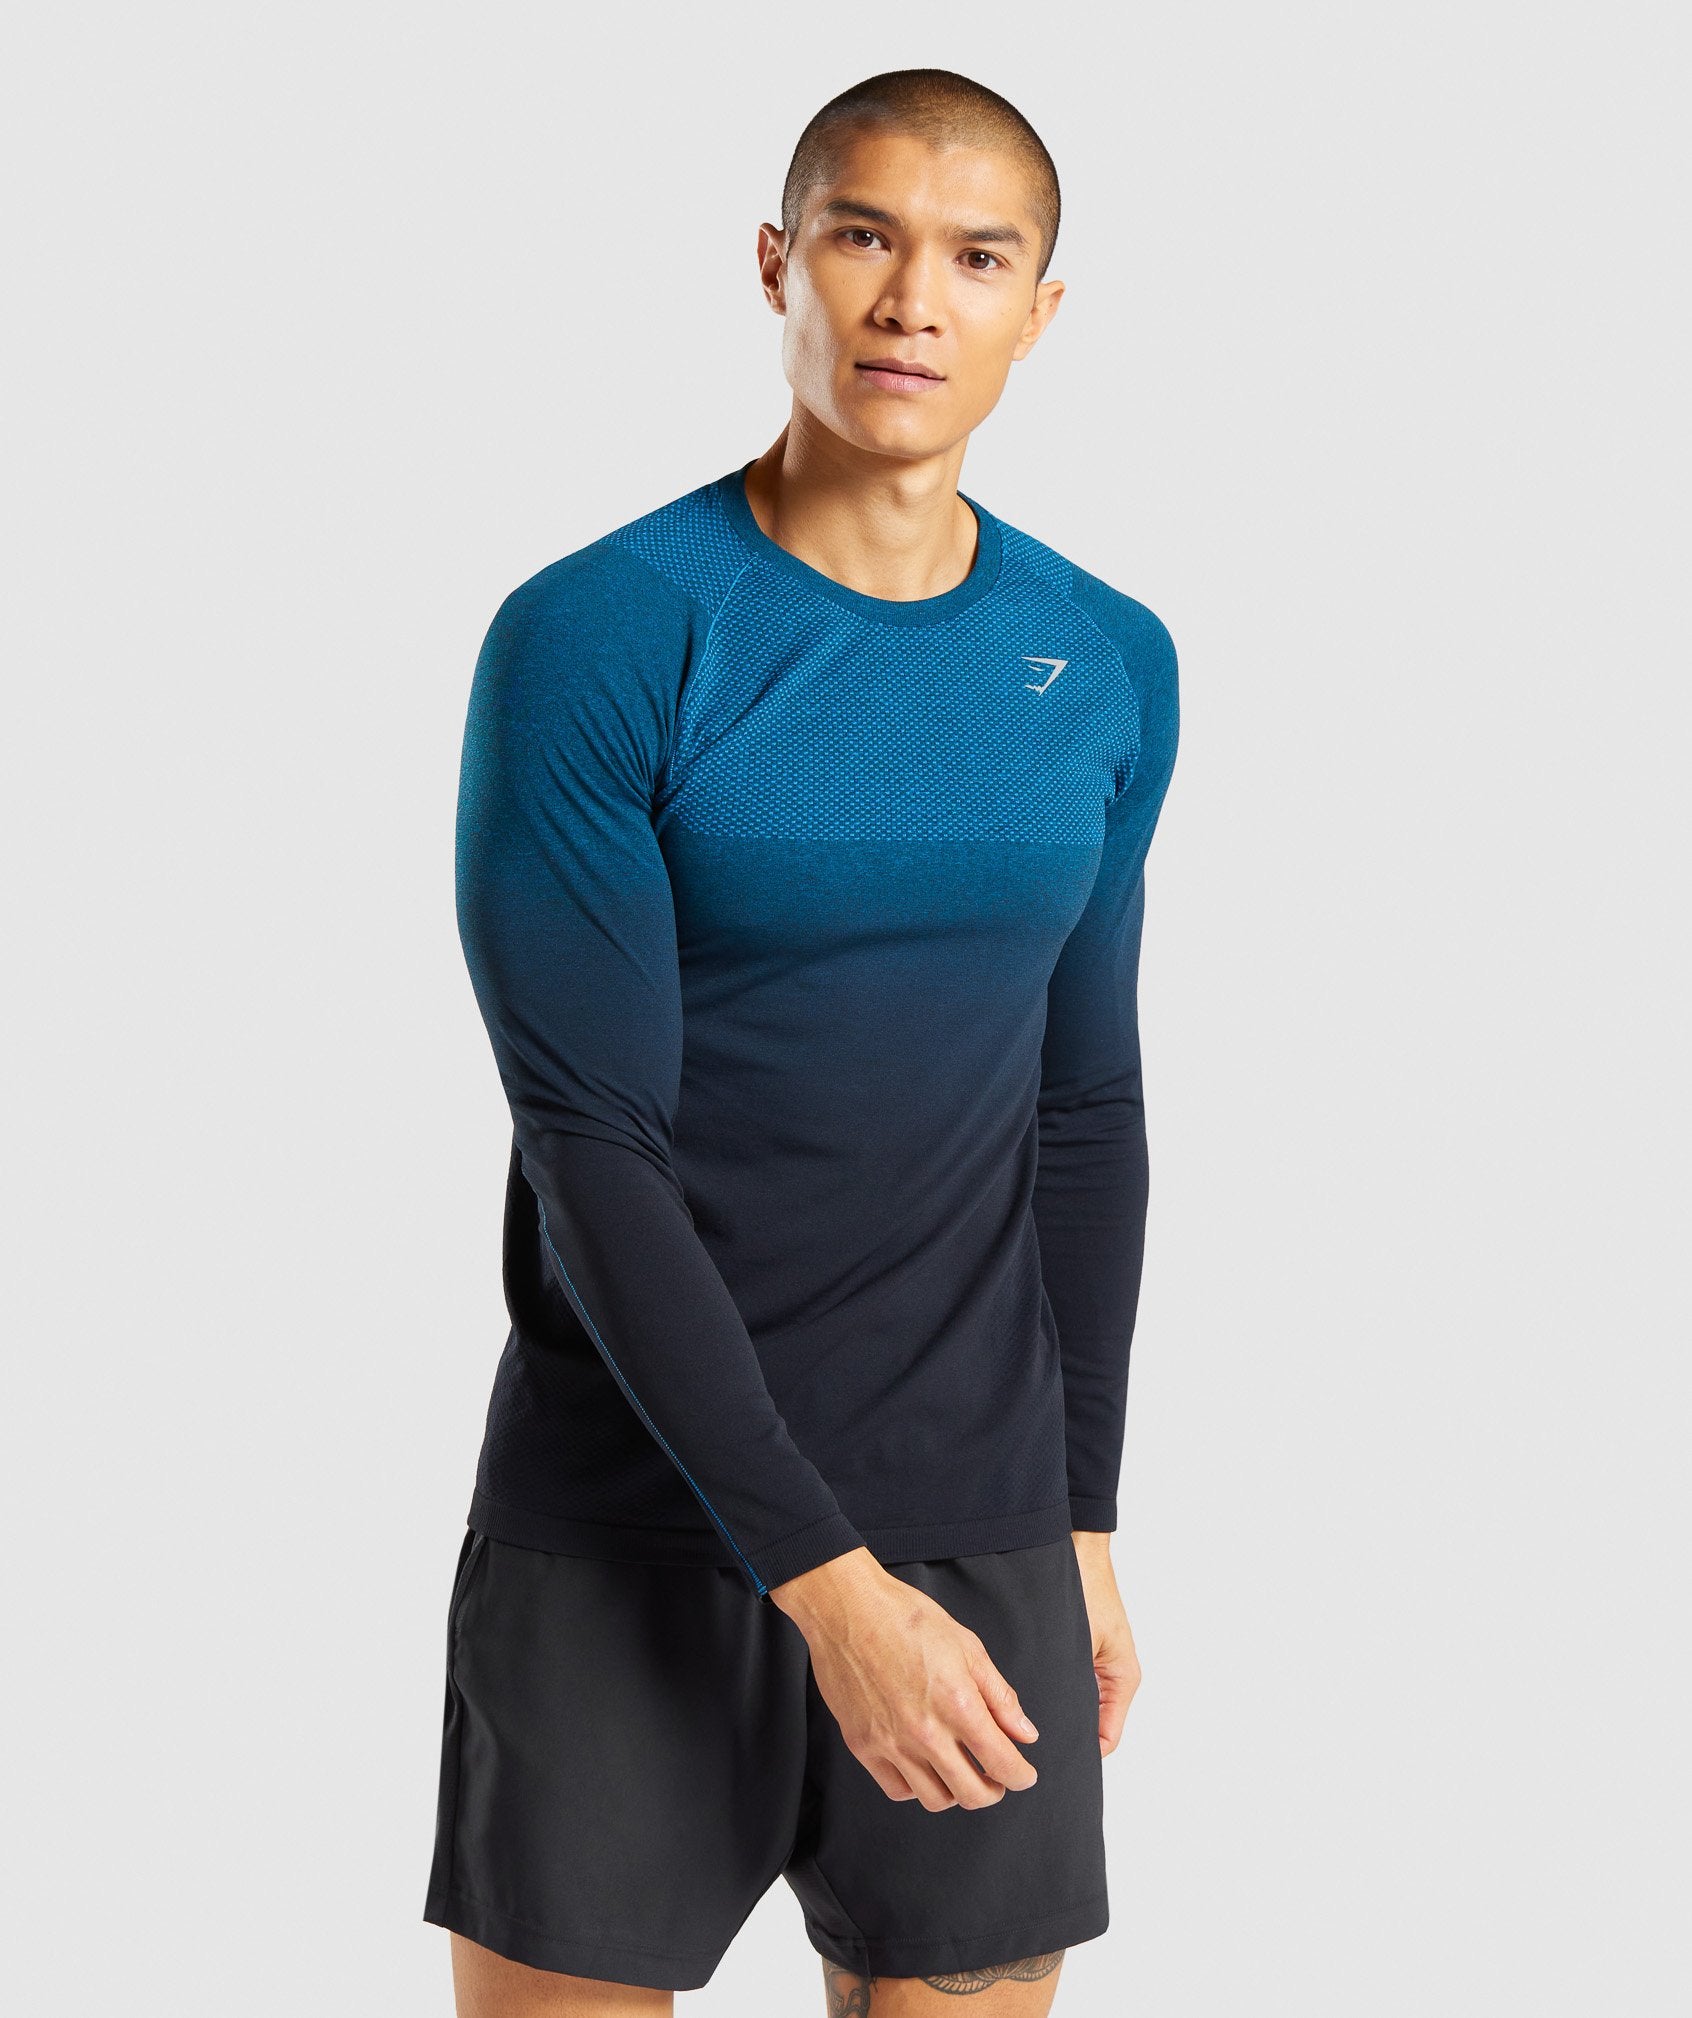 Vital Ombre Seamless Long Sleeve T-Shirt in Teal Marl/Black - view 1